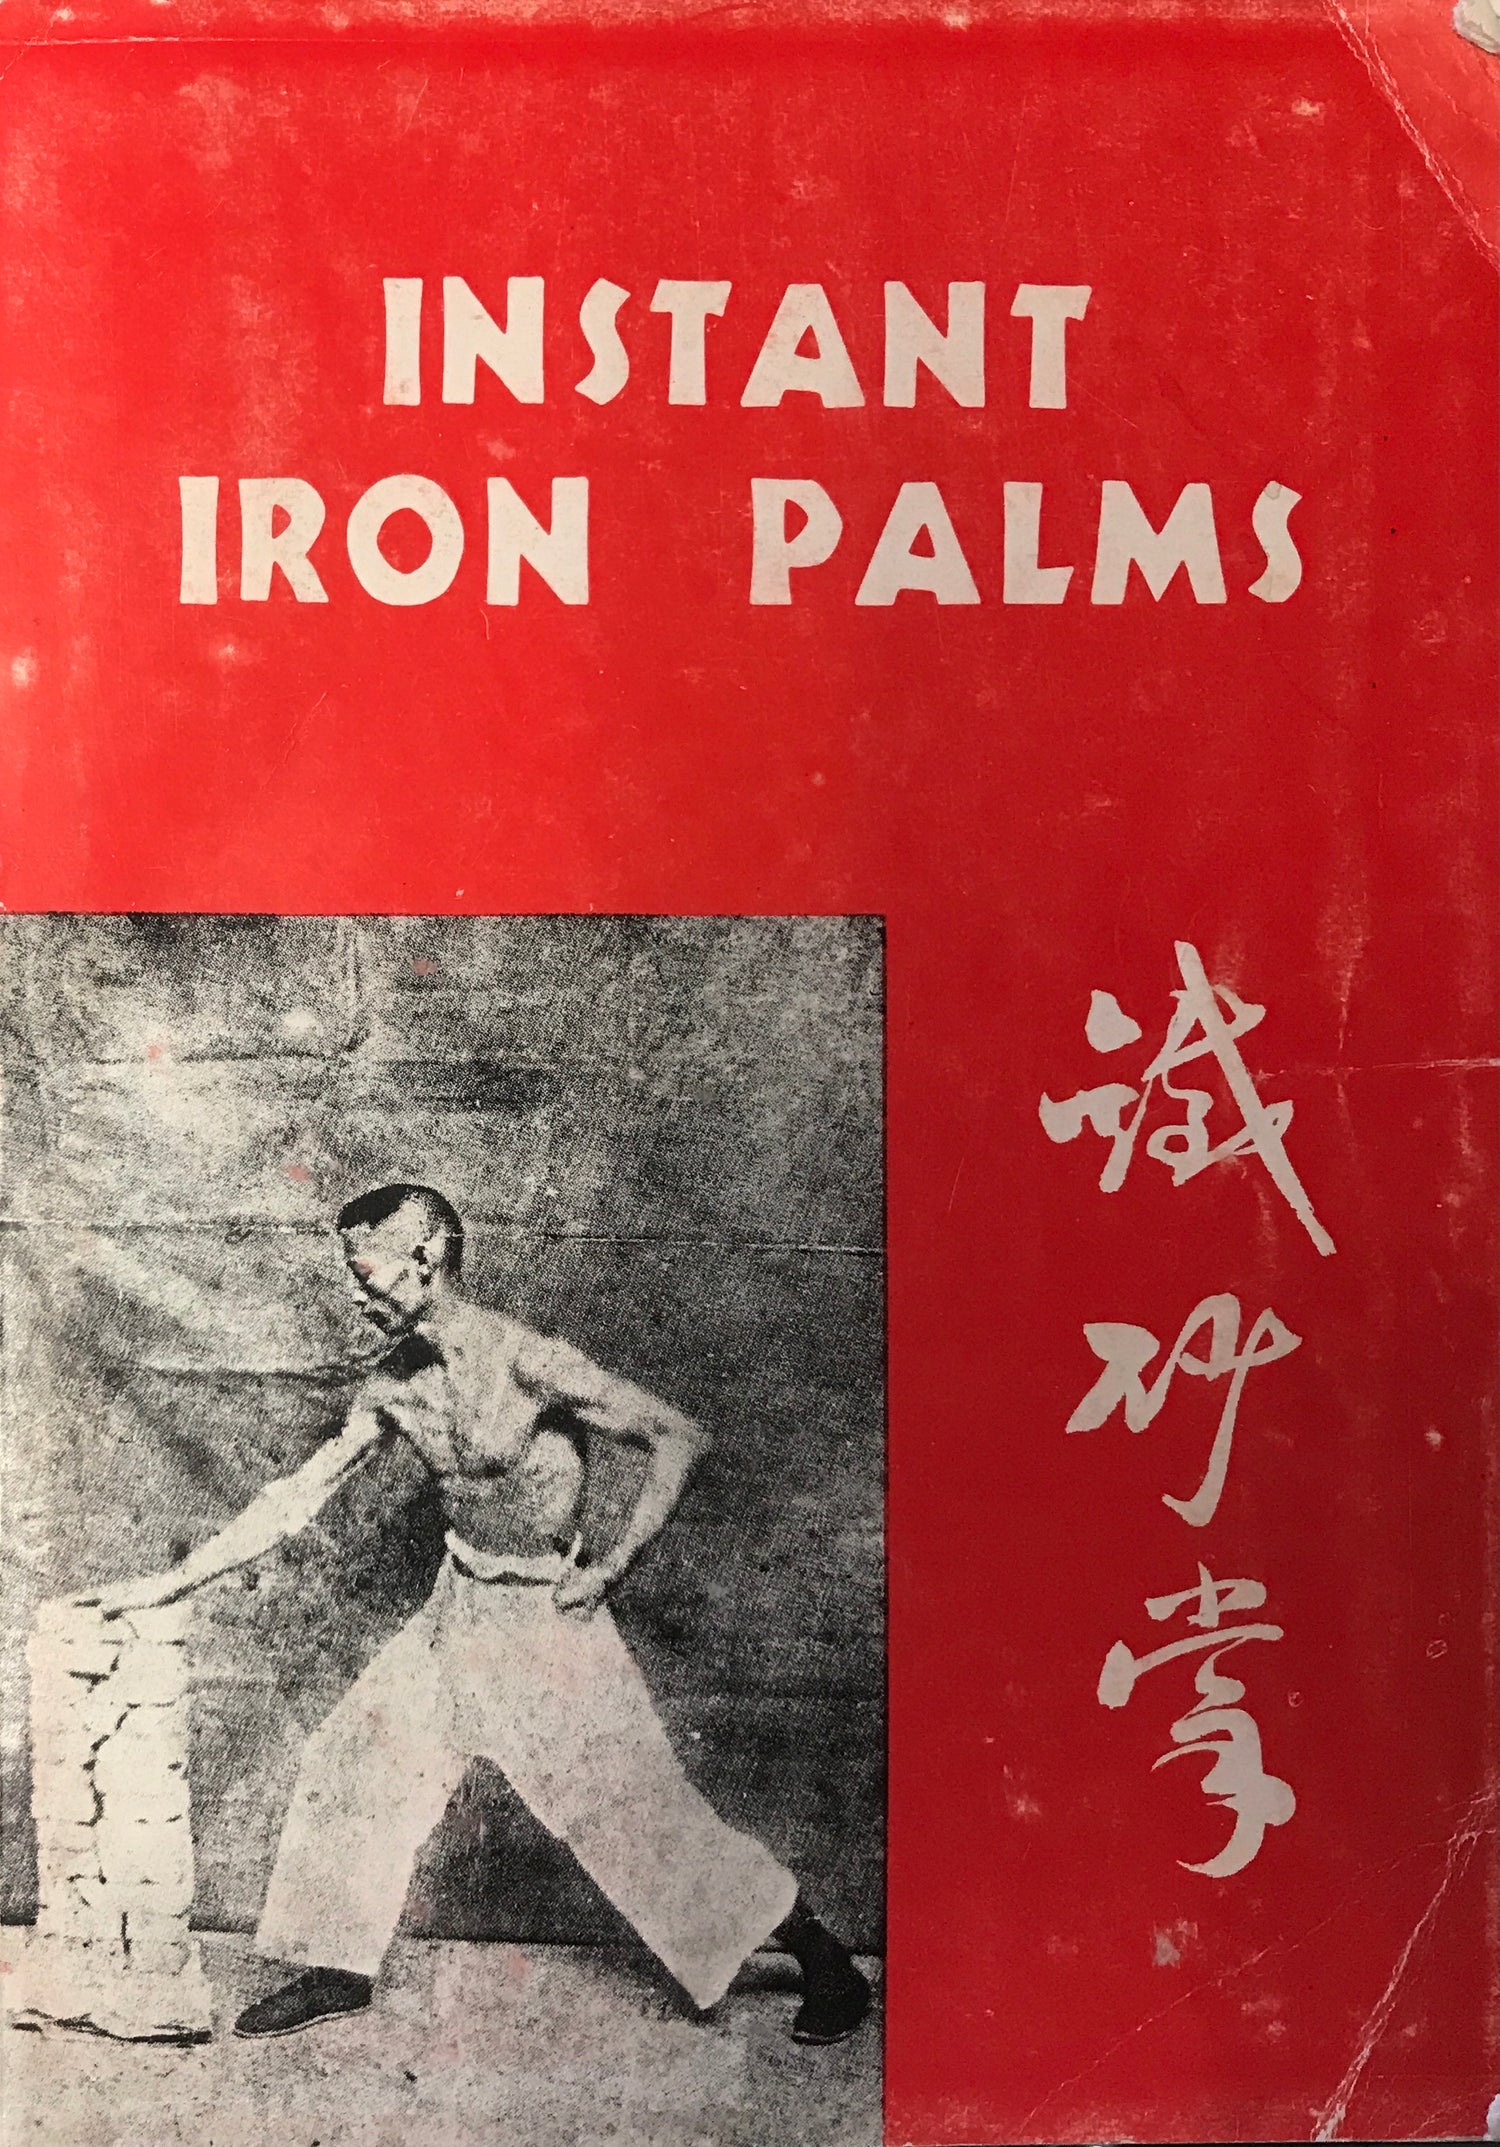 Instant Iron Palms Book by H.C. Chao (Preowned) - Budovideos Inc